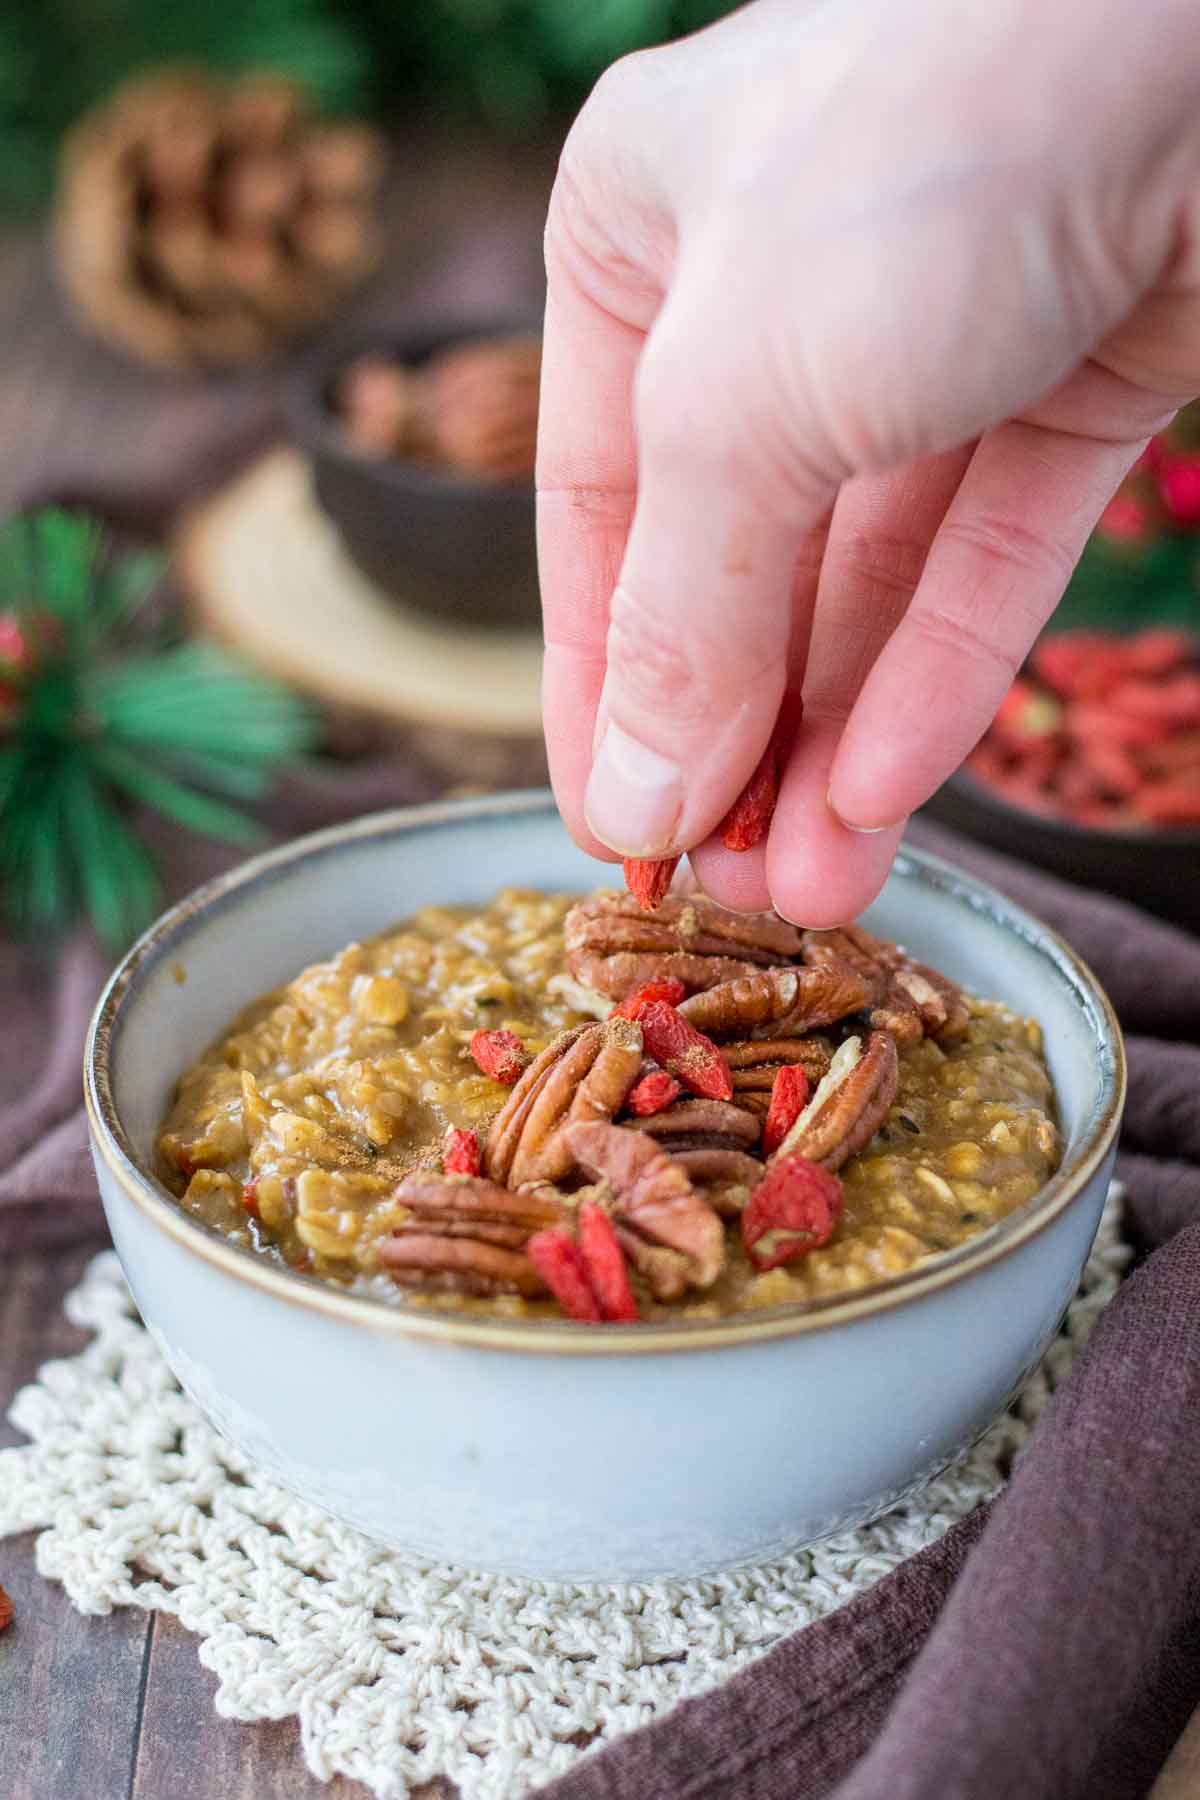 Hand putting goji berries on top of the Gingerbread Oatmeal